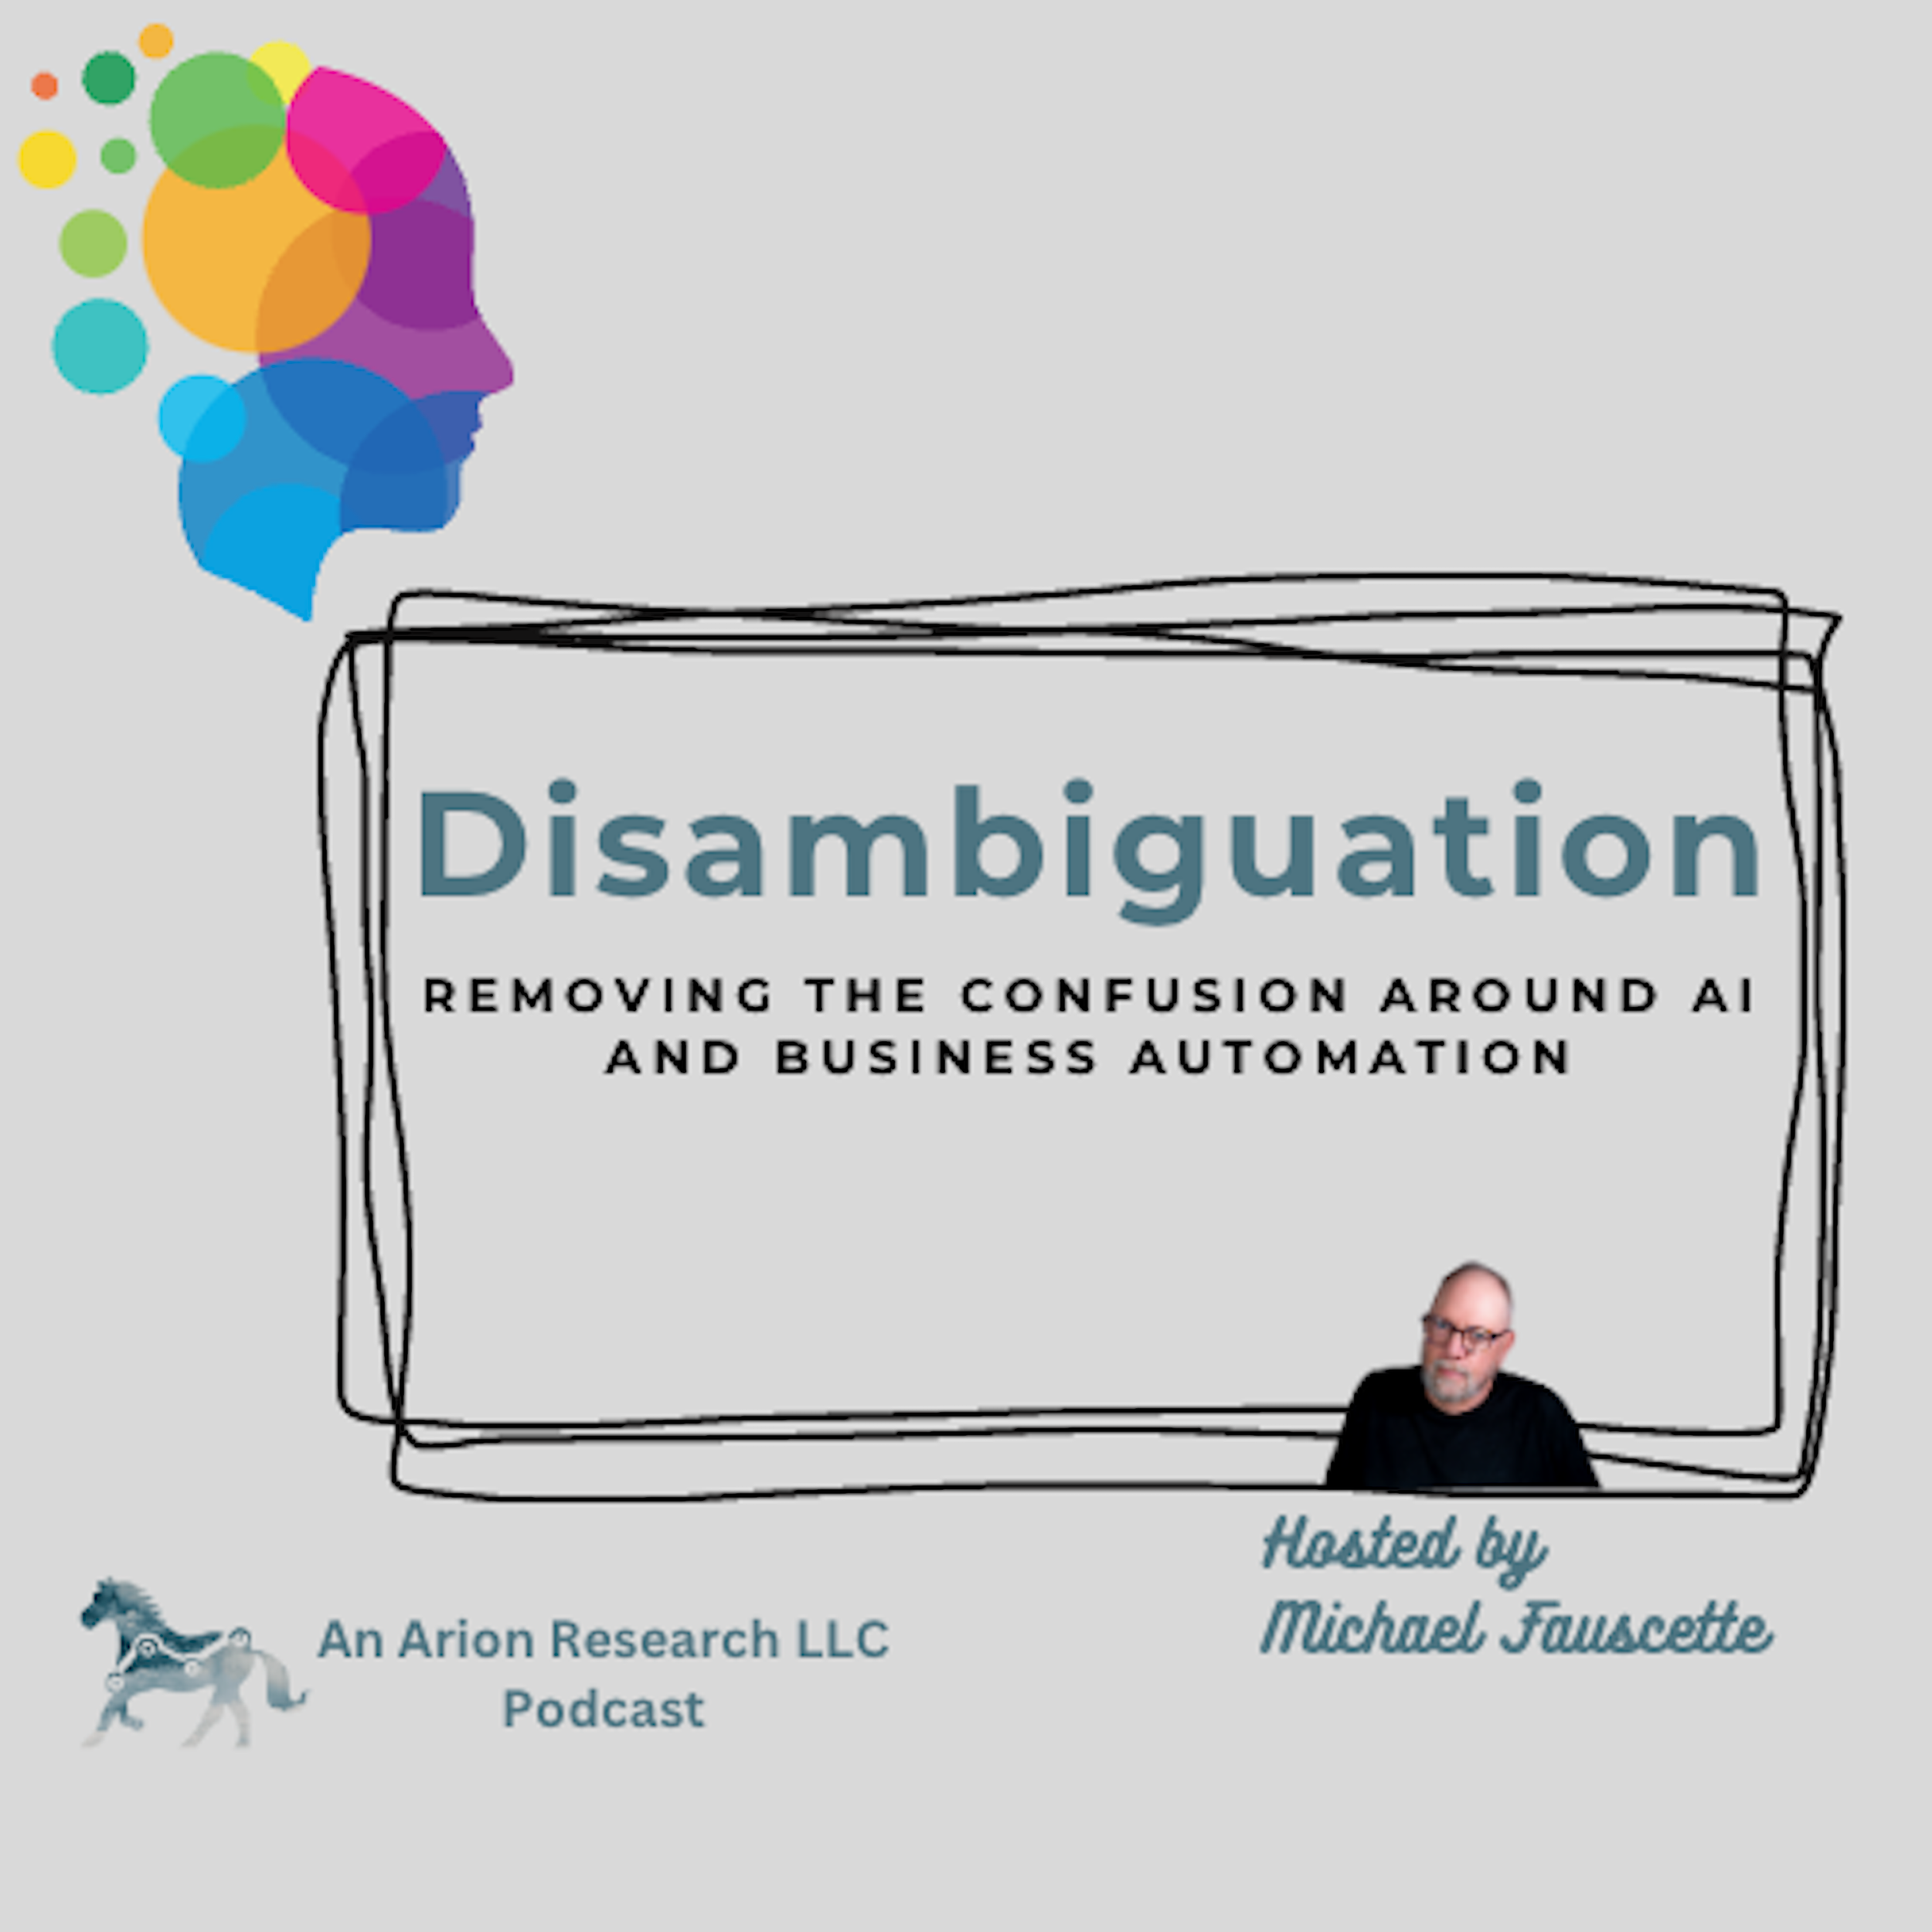 Introducing the Disambiguation Podcast — Arion Research LLC